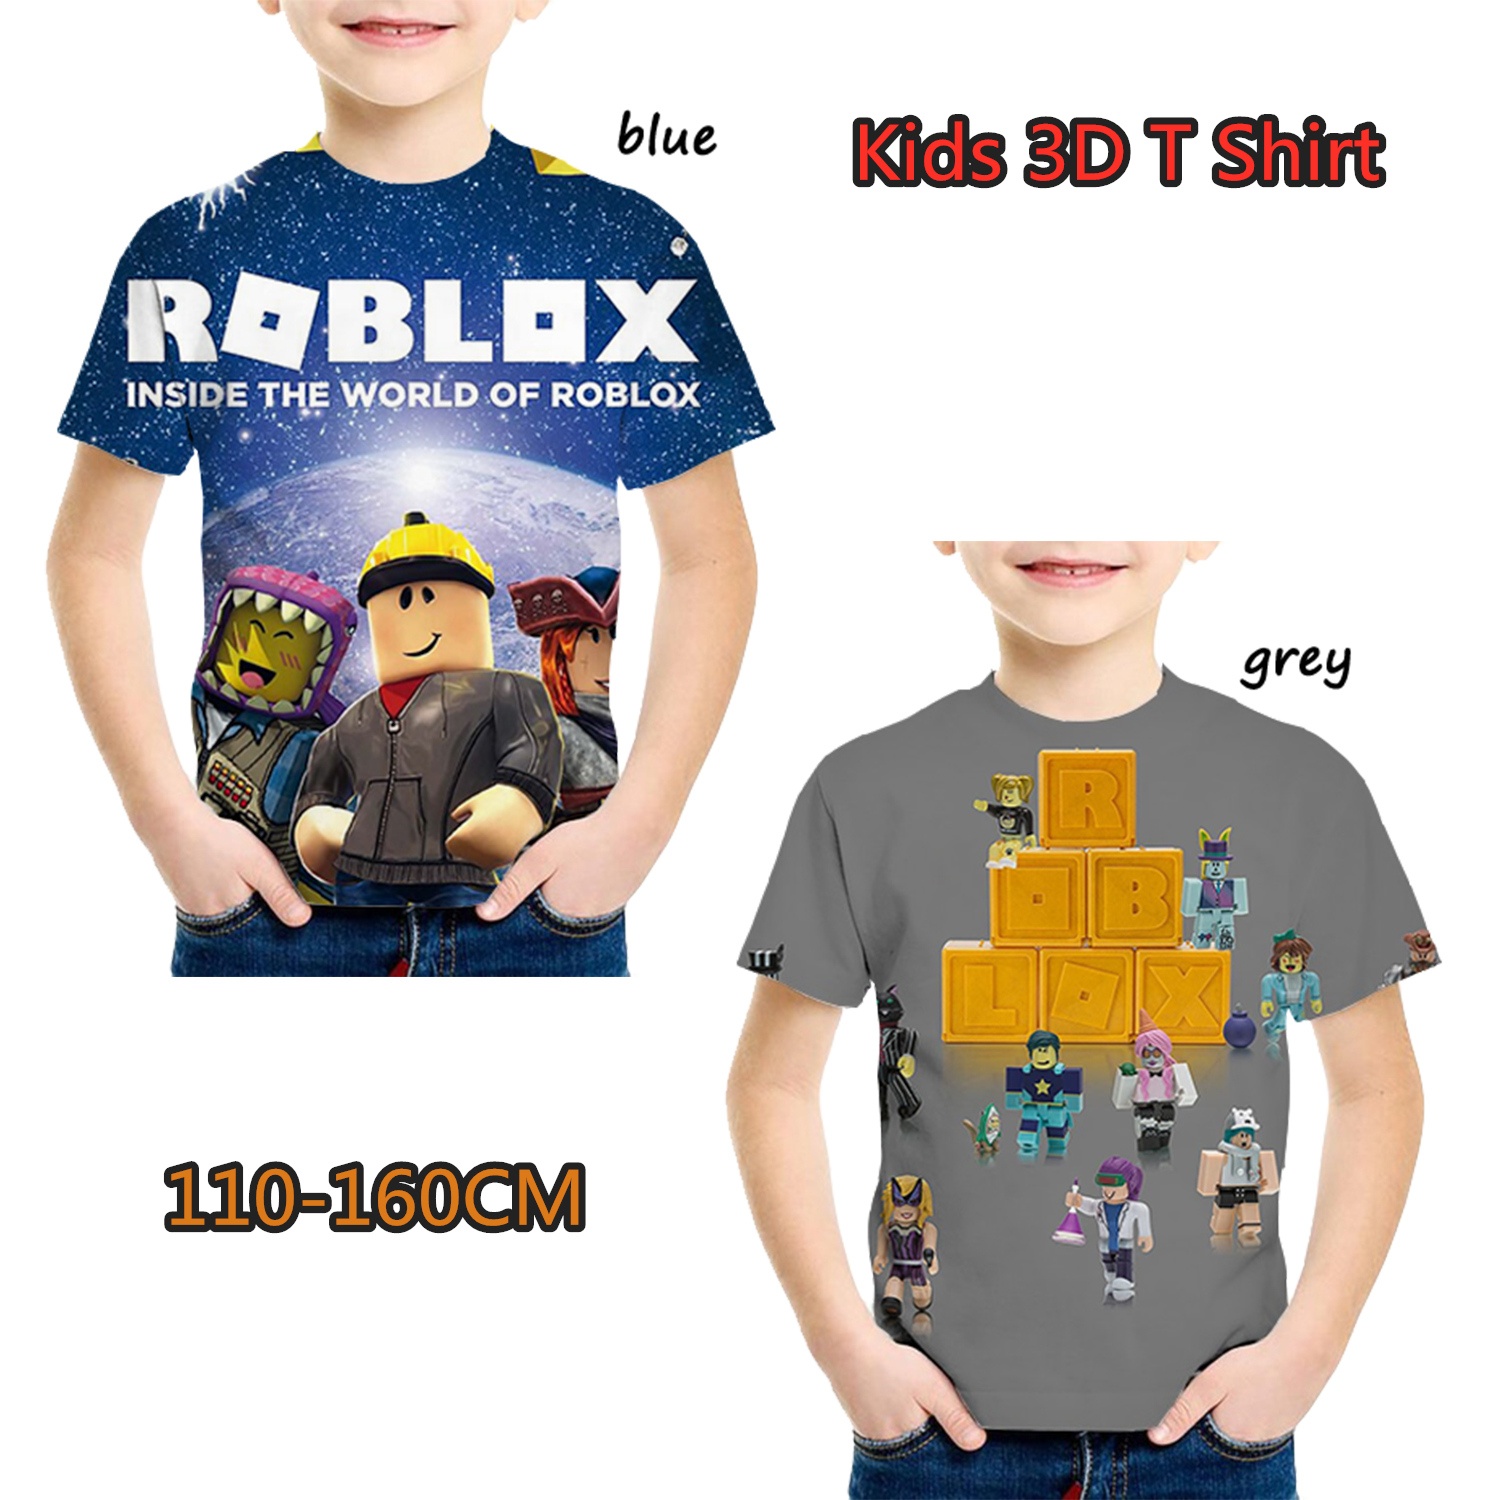 Fashion Cartoon Roblox 3d Printed Kids T Shirt Boys And Girls Funny Short Sleeve Round Neck Tees Wish - 2019 kids roblox tees tops clothes children 3d games print t shirt clothing for boys girls summer tshirt costume baby t shirt dx107 j190427 from